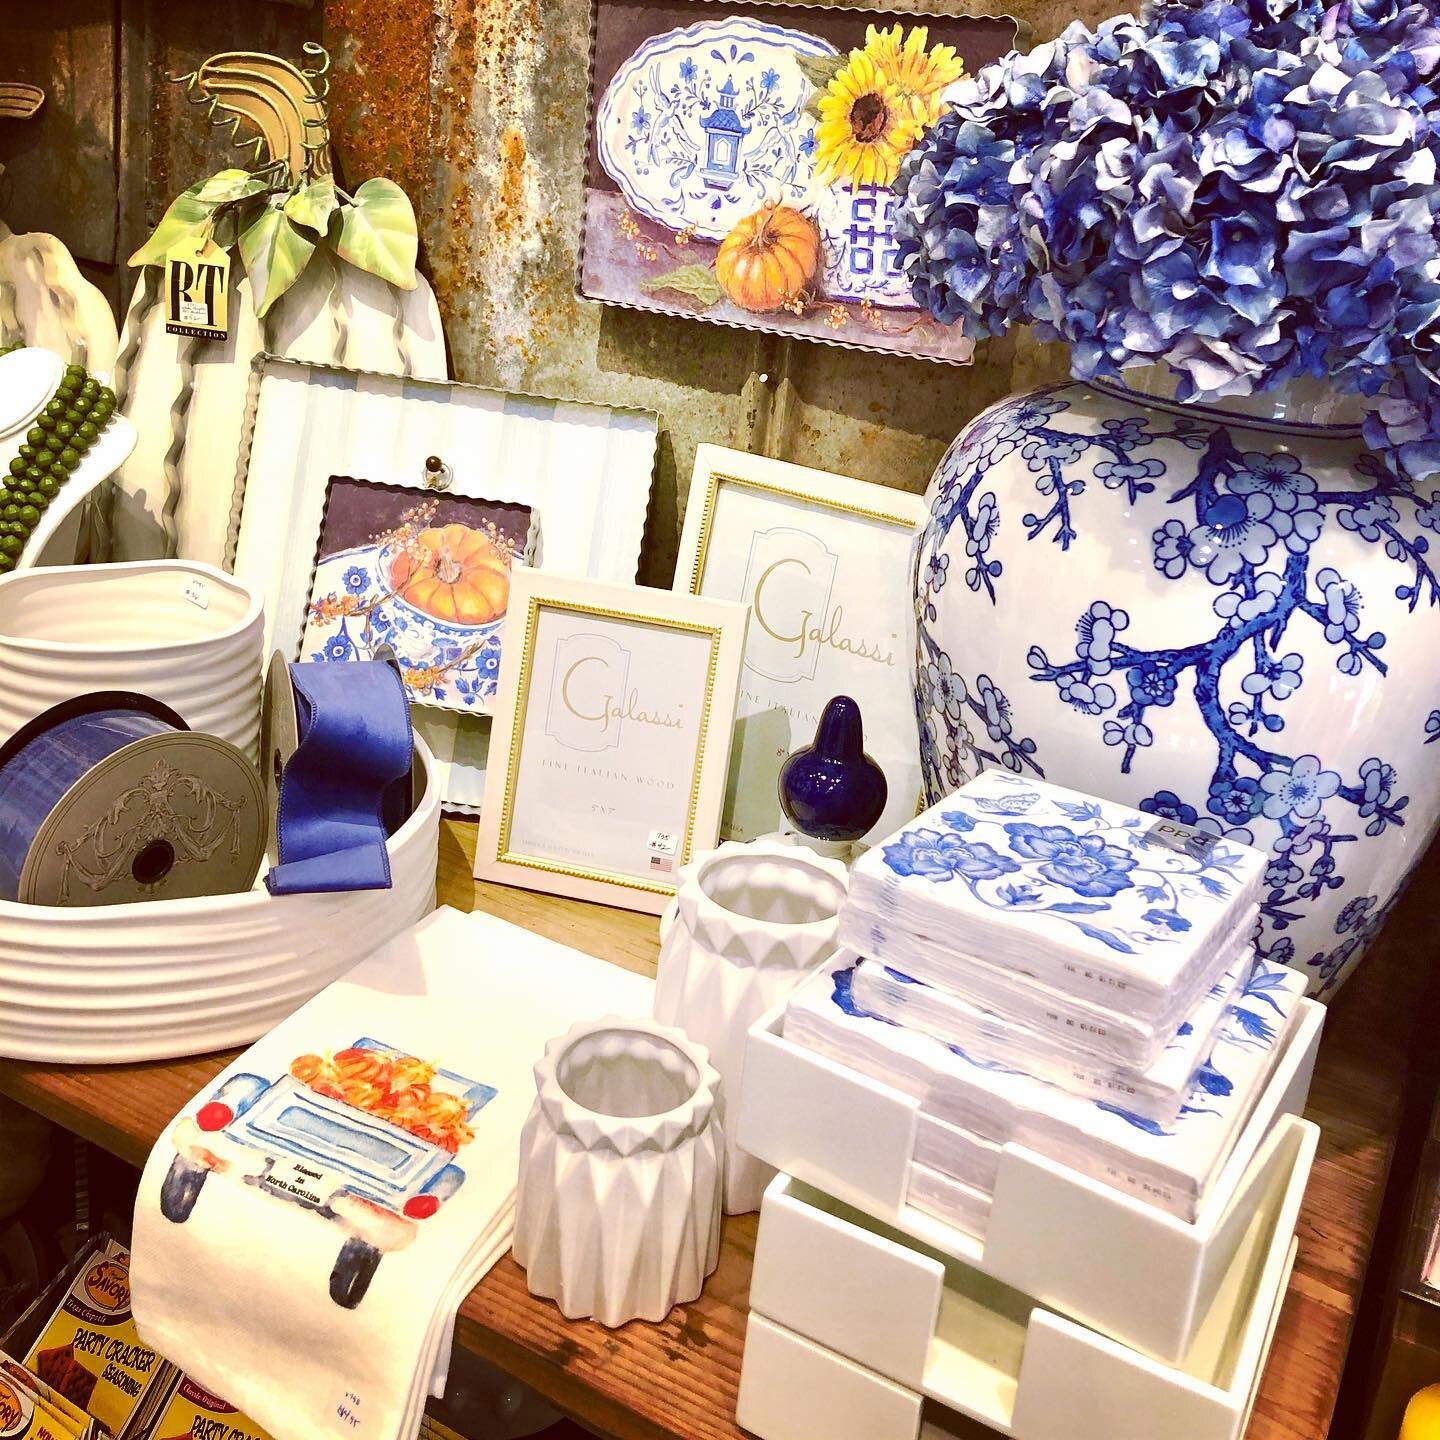 Blue and white home decor remains strong this Fall and upcoming holiday season. Keith Lloyd Designs has it for you @lloydandlady boutiques!  Open 10-6 today.
.
.
.
#blueandwhitedecor #blueandwhitehome #fall #falldecor #falldecoratingideas #blueandwhi